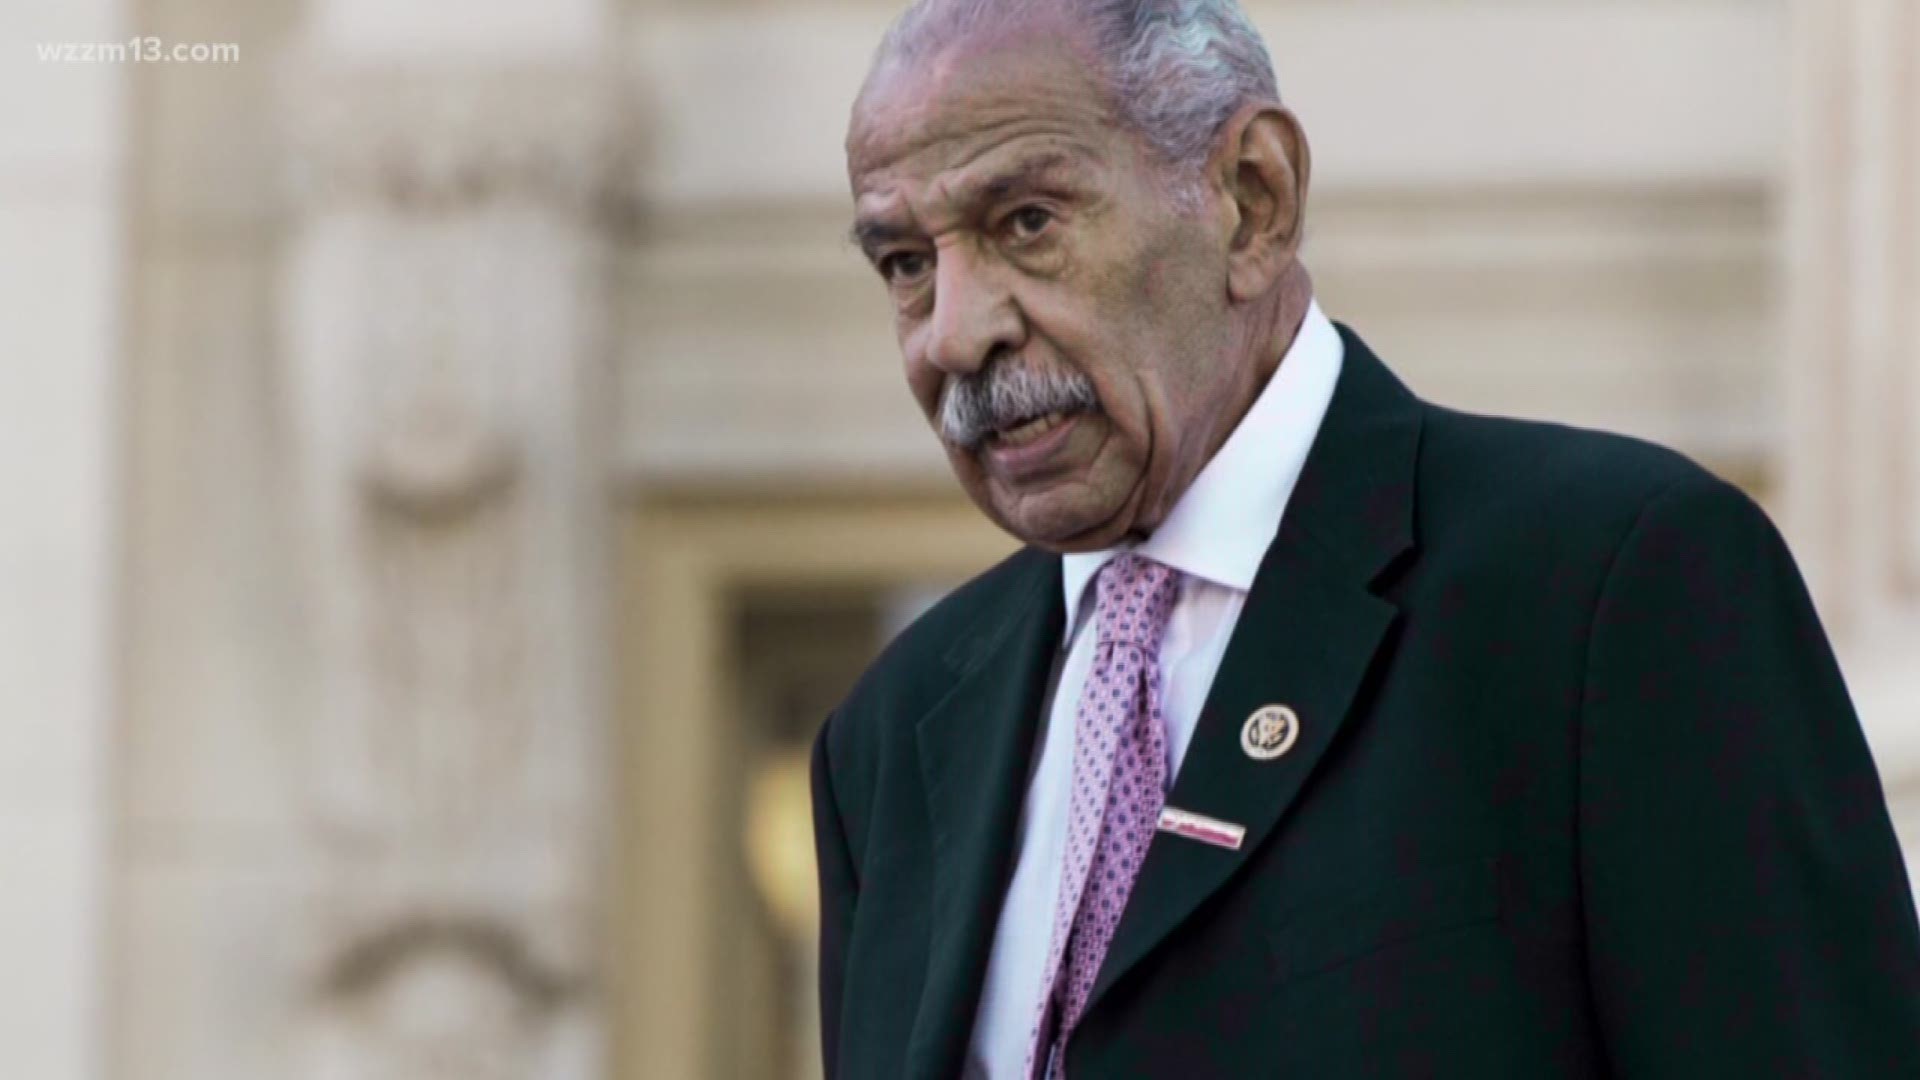 Conyers retires following seven different accusations of sexual harassment